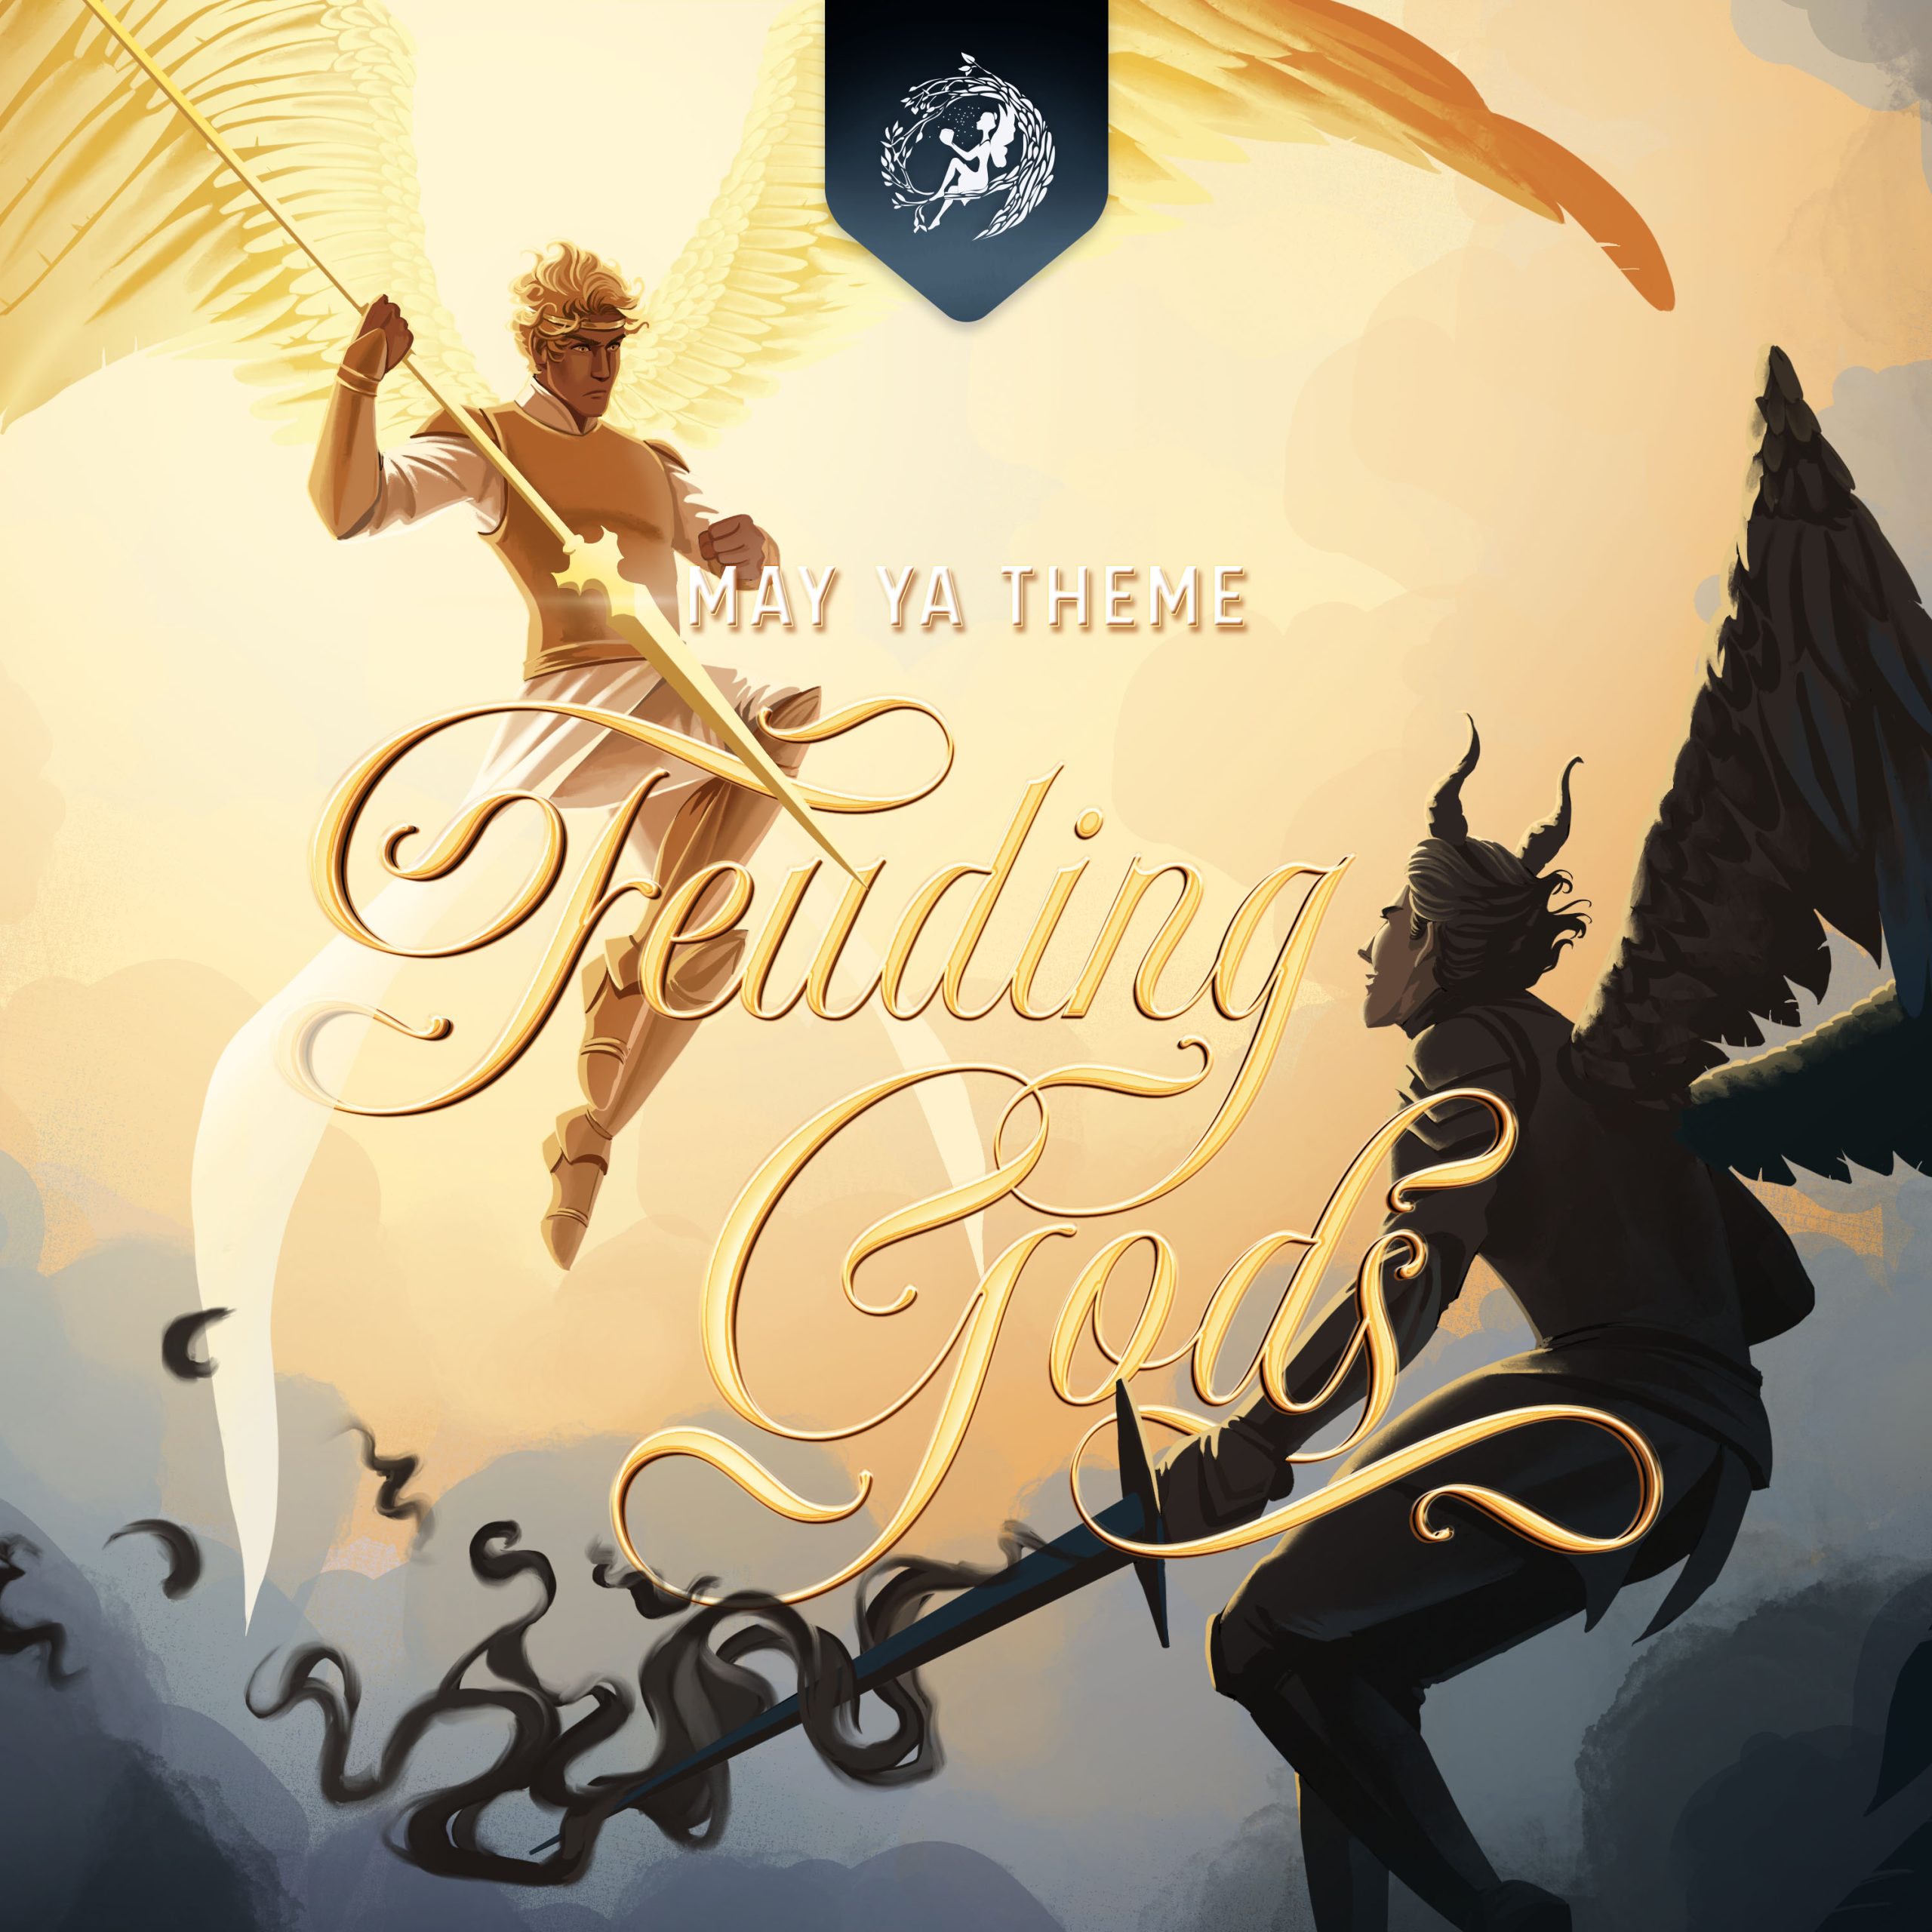 May Young Adult Theme: FEUDING GODS